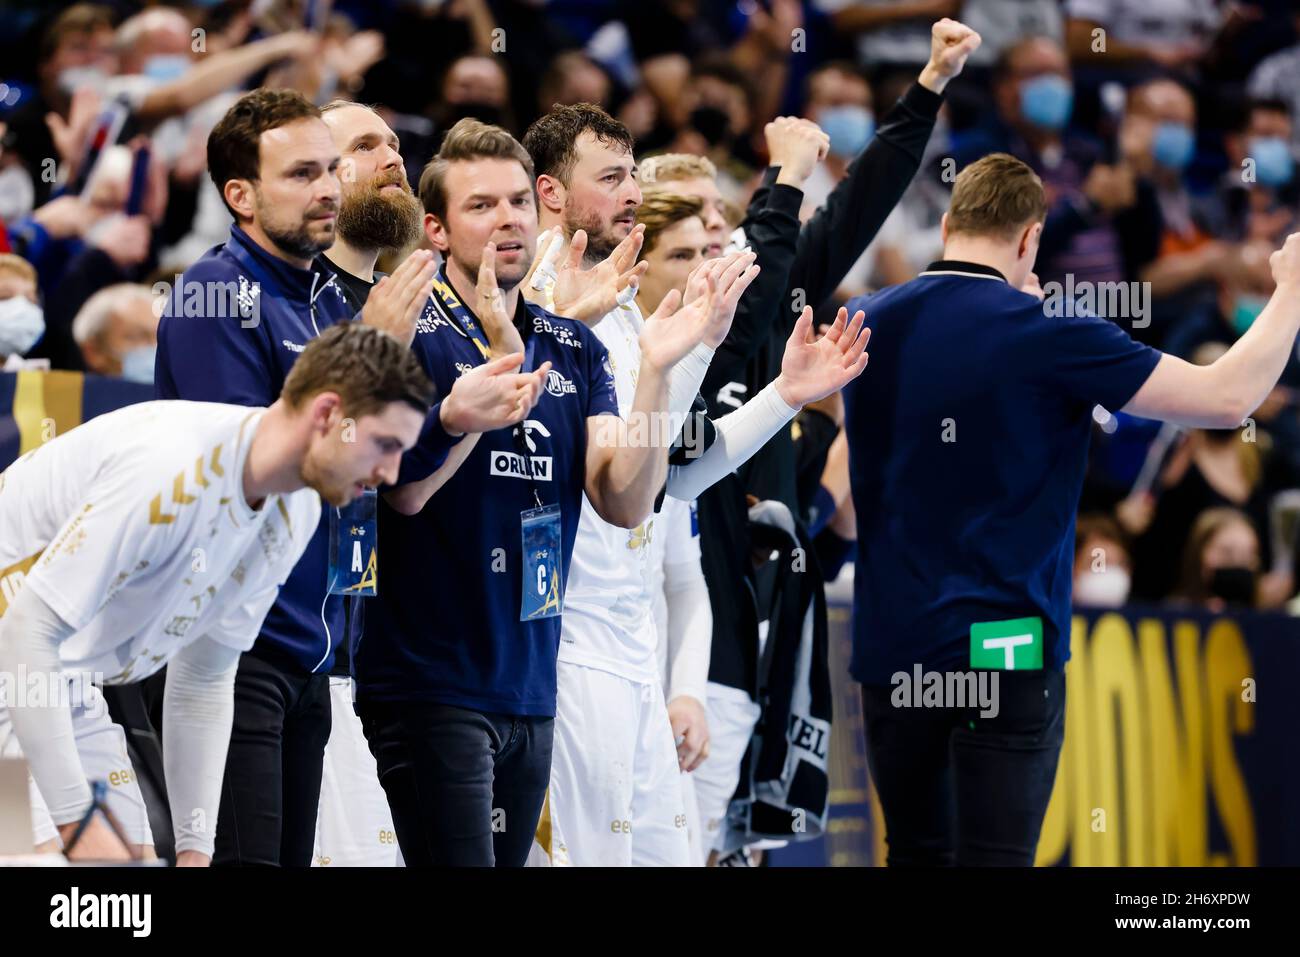 Kiel, Germany. 18th Nov, 2021. Handball: Champions League, THW Kiel -  Aalborg HB, Group Stage, Group A, Matchday 7, Wunderino Arena. The Kiel  players cheer after a goal. Credit: Frank Molter/dpa/Alamy Live